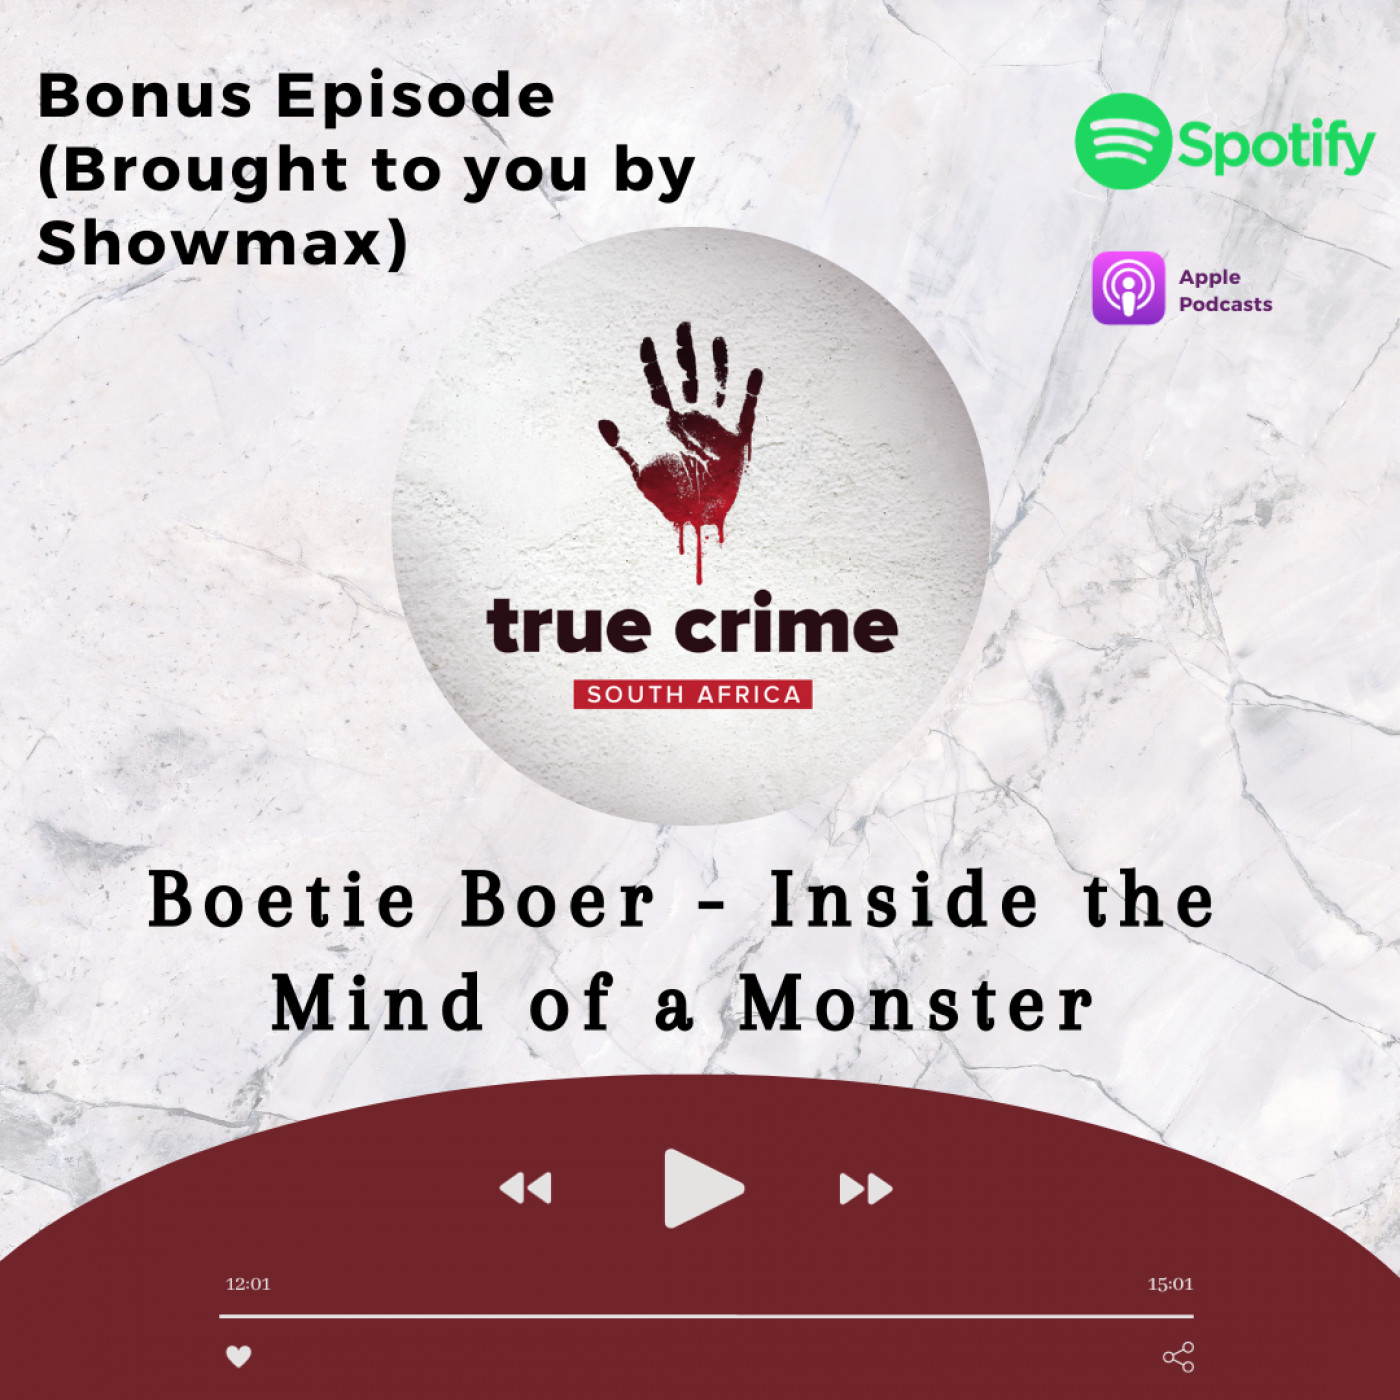 Companion Episode - Boetie Boer: Inside the Mind of a Monster (Brought to you by Showmax)